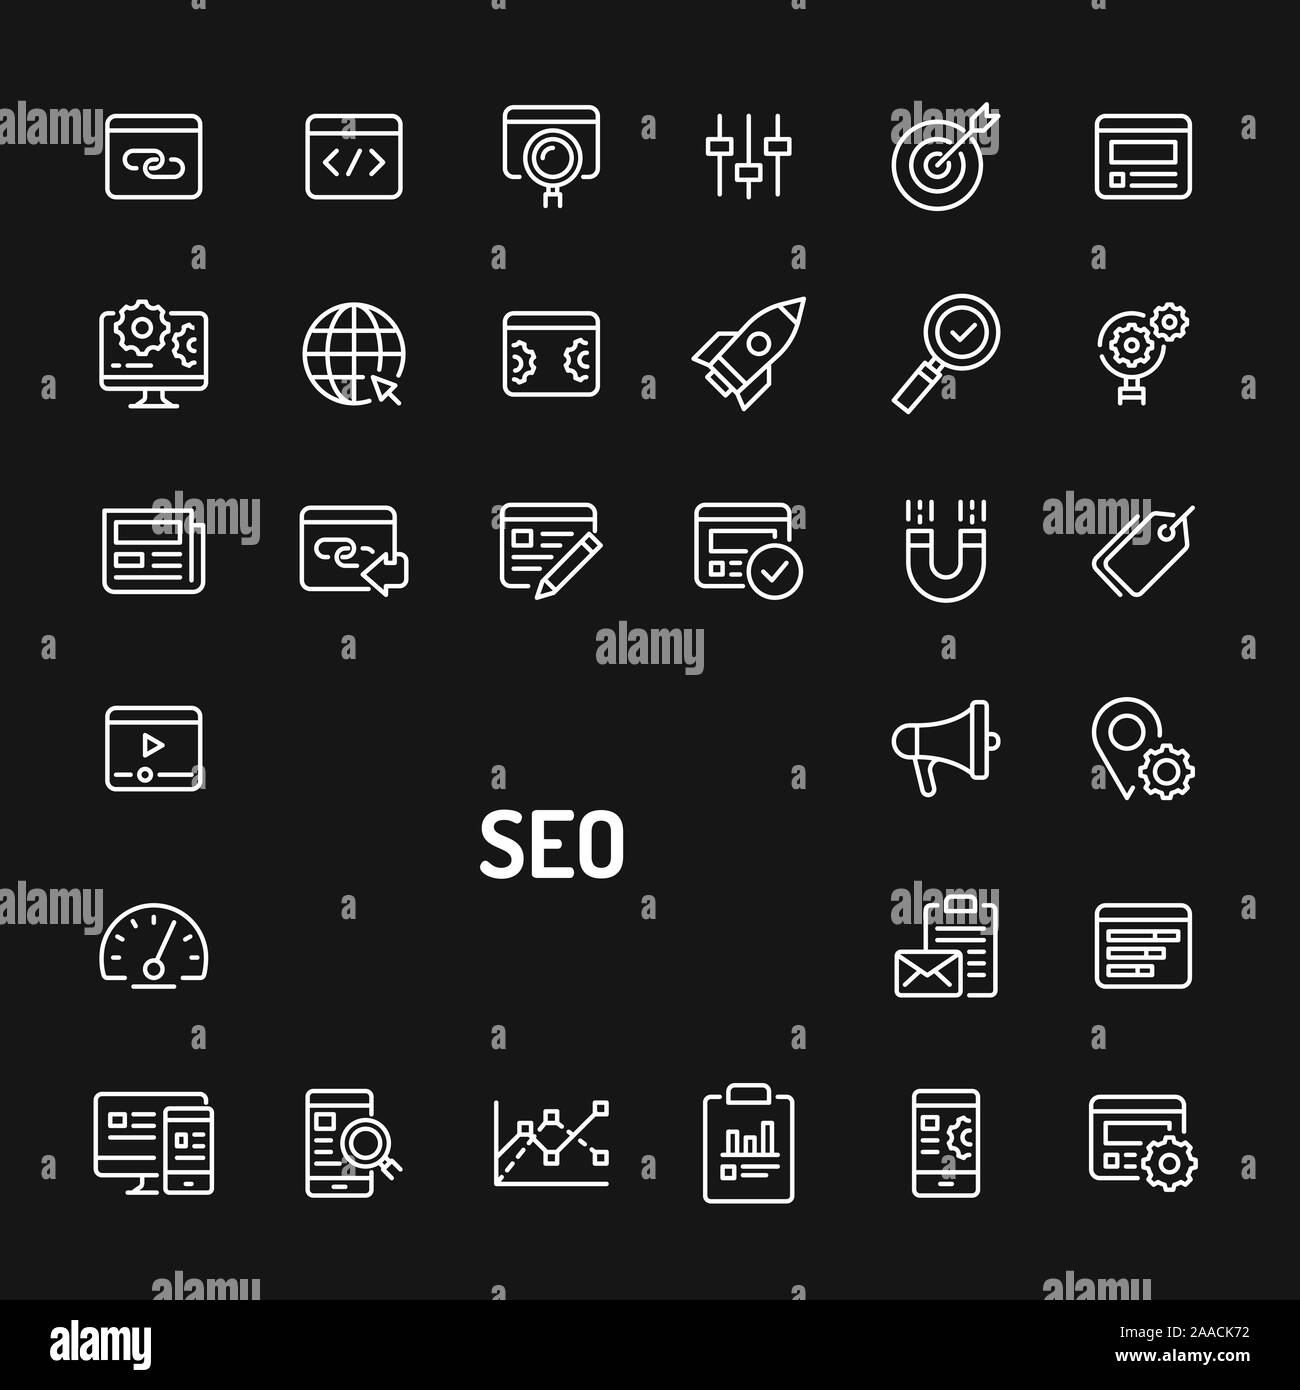 Simple white line icons isolated over black background related to Search Engine Optimisation (SEO). Vector signs and symbols collections for website a Stock Vector